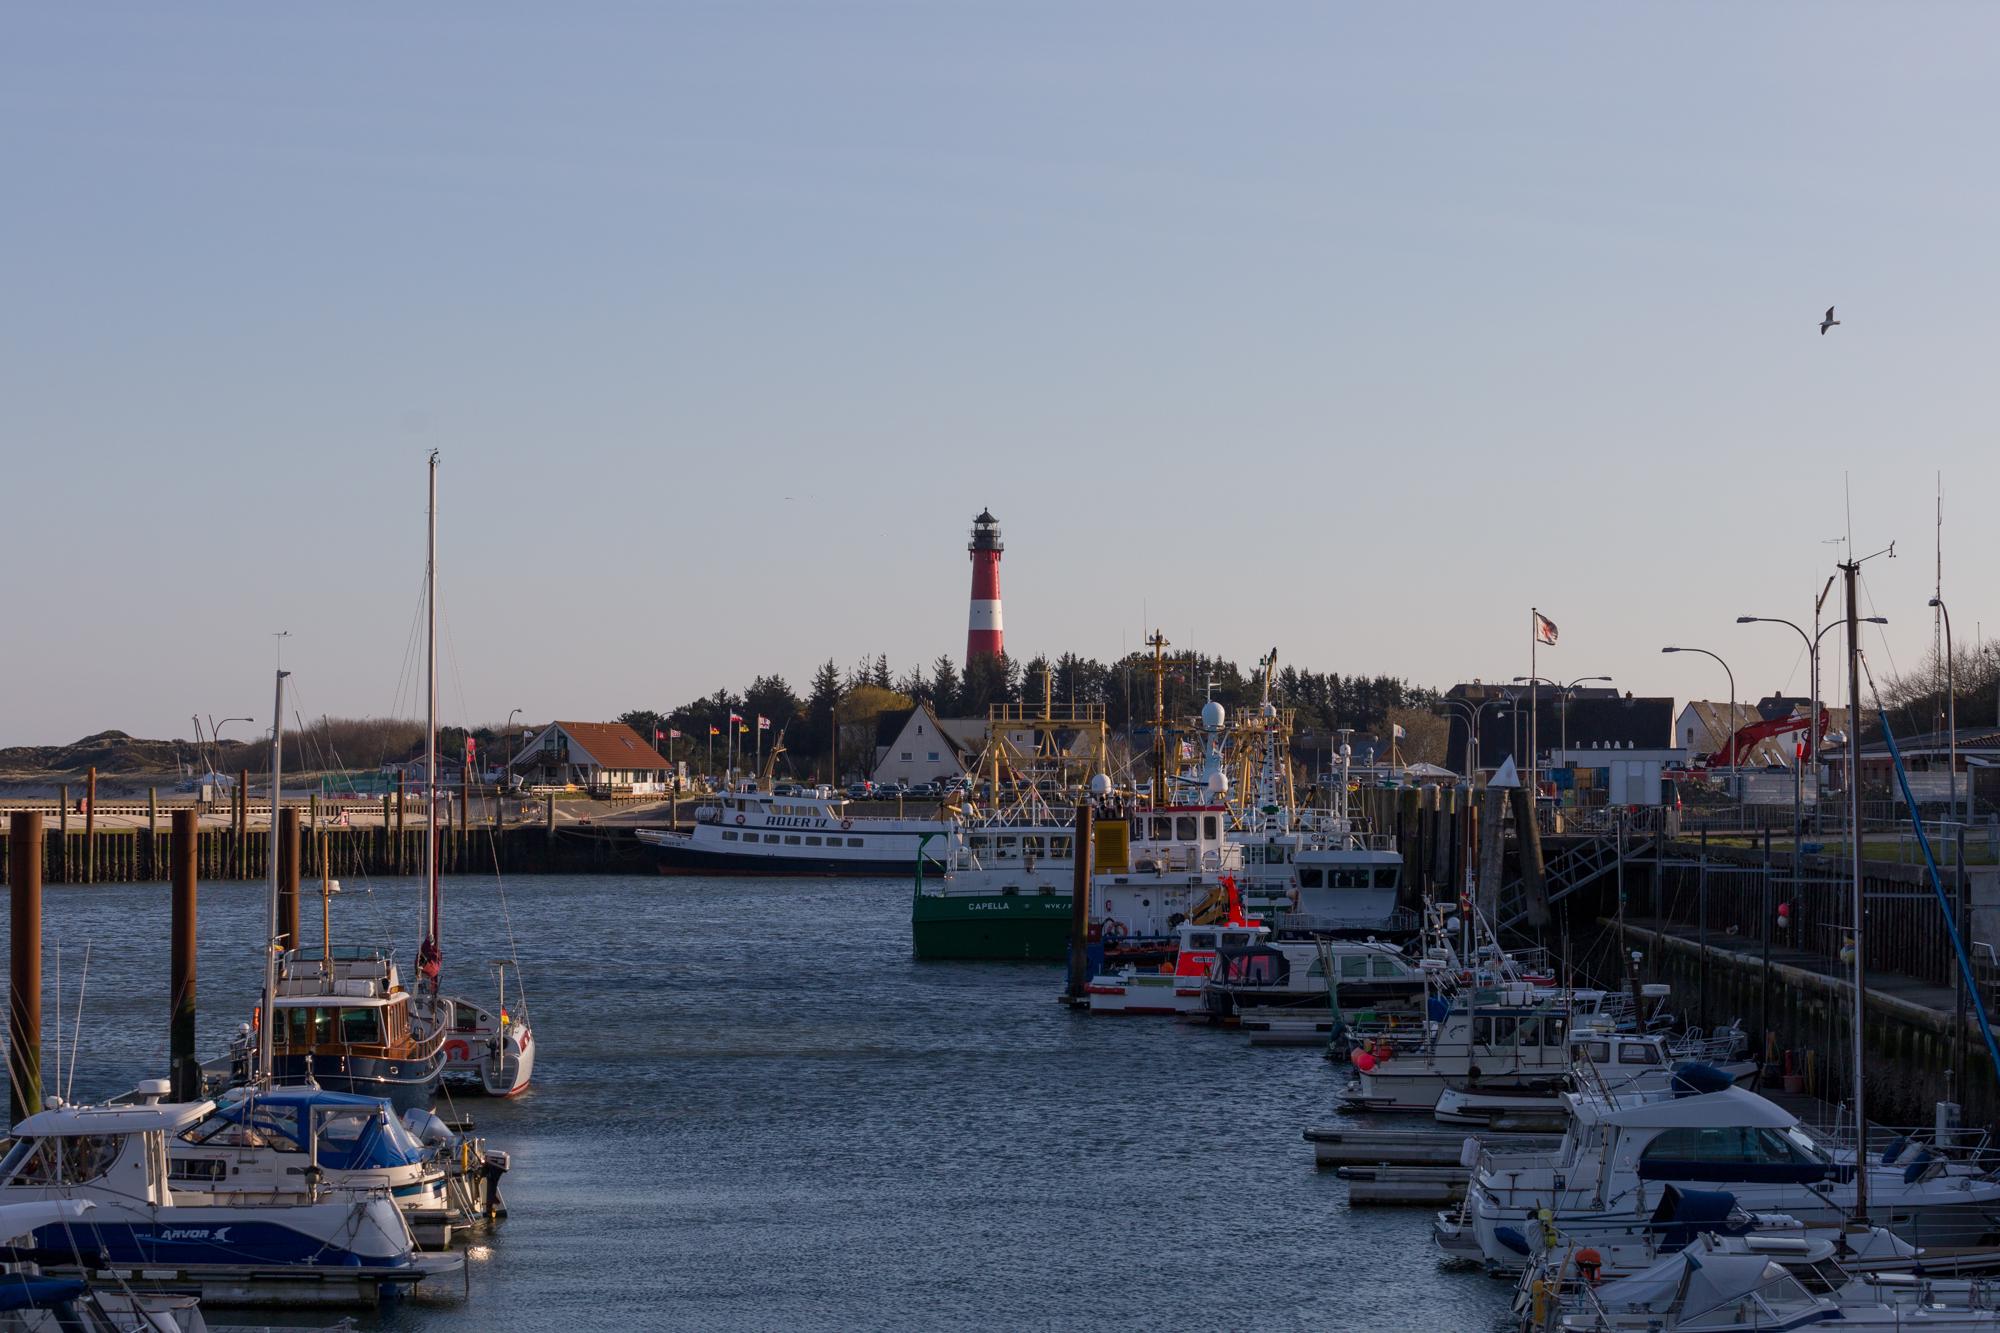 If you head north of the lighthouse, you’ll find the small harbour of Hörnum. Take a stroll around the basin and you’ll get a great view of the boats with the lighthouse in the background.